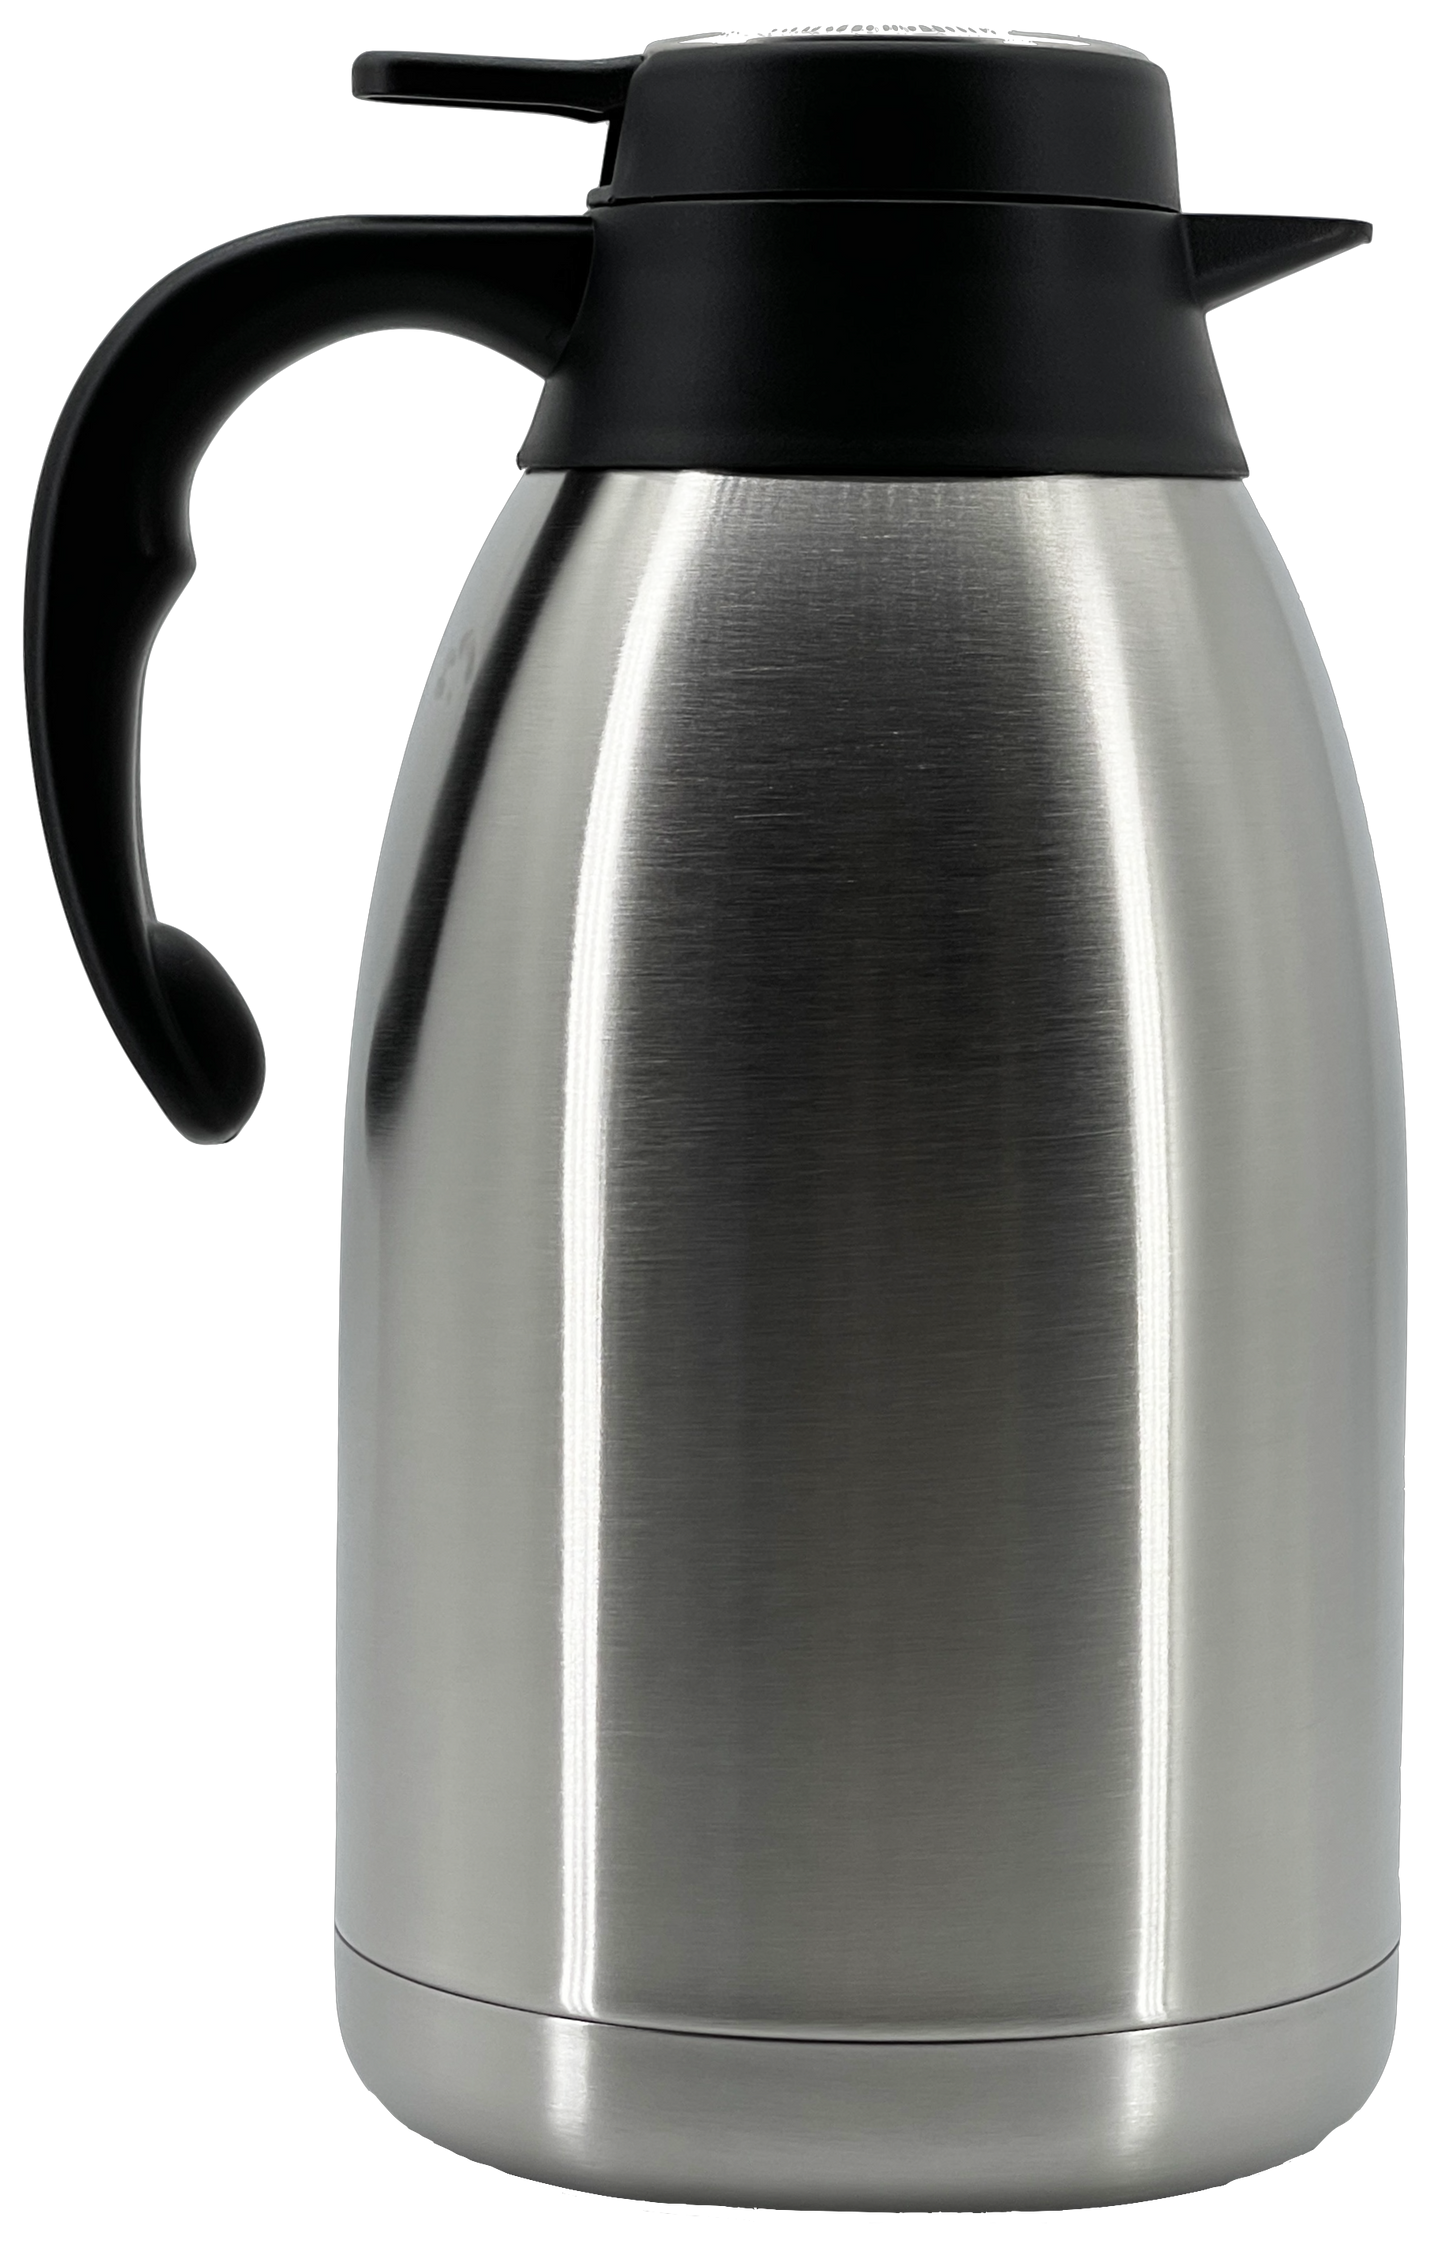 Coffee Carafe Insulated Thermal Server 51 Oz/1.5 Liter - Stainless Ste –  Planet Oasis